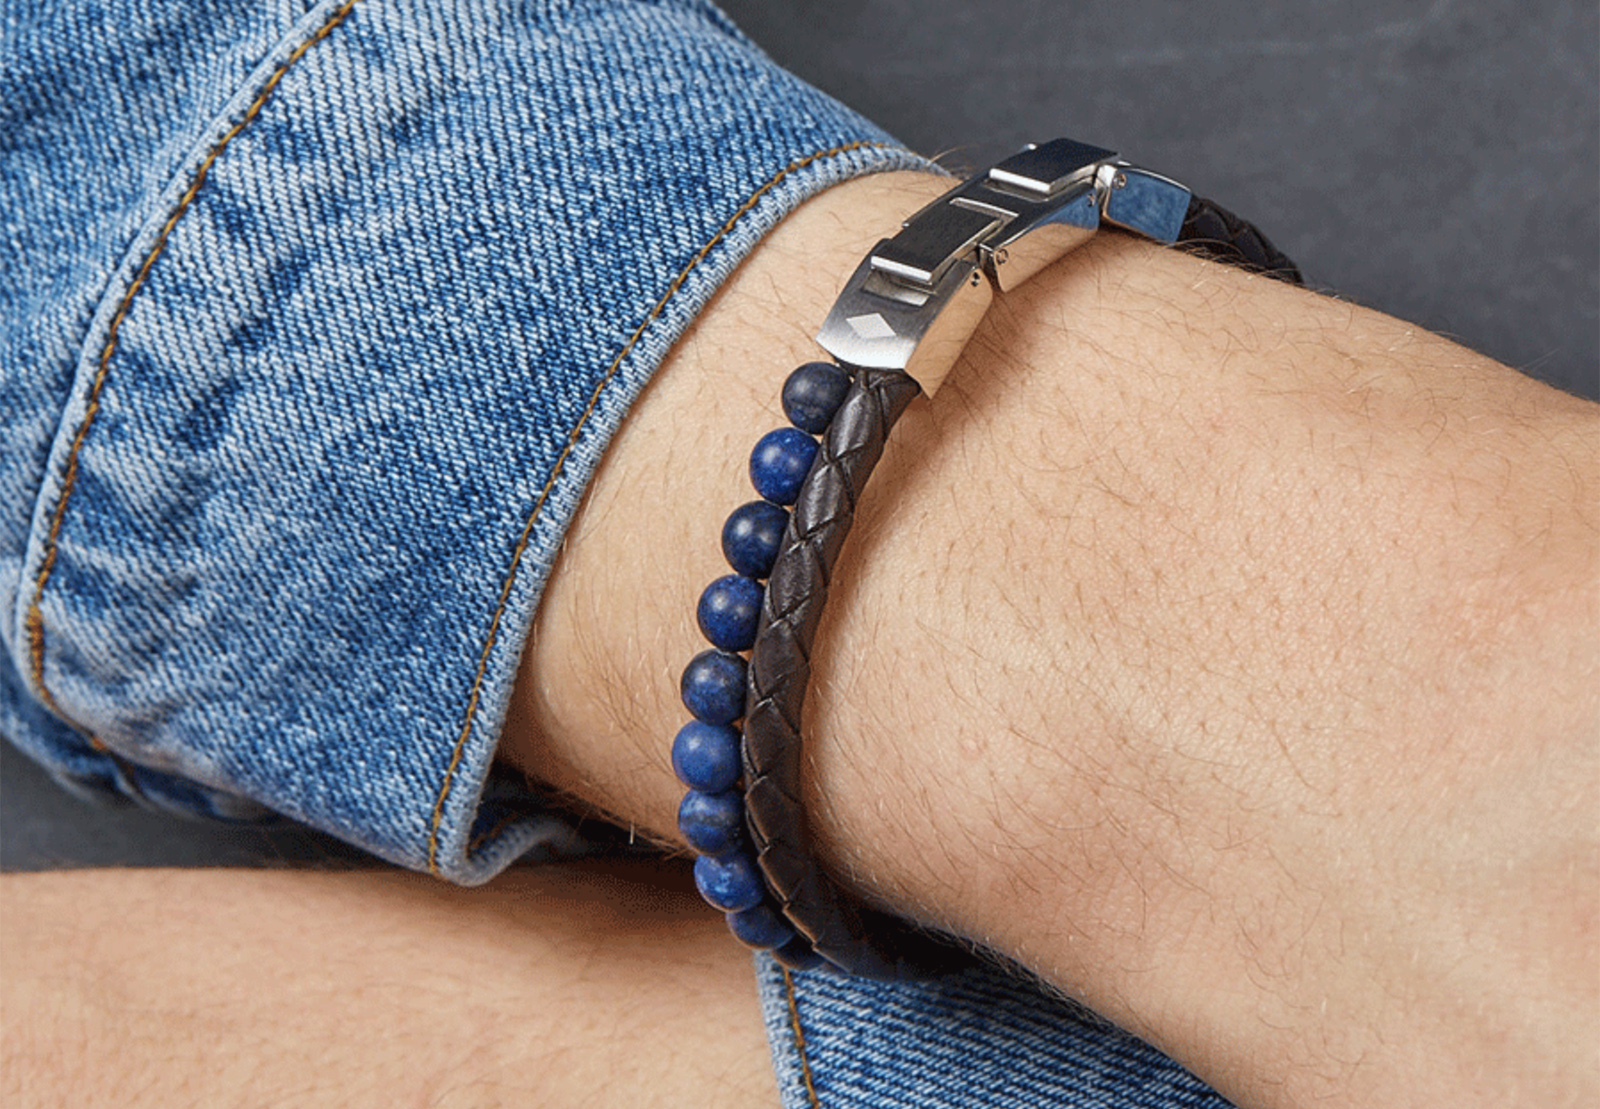 Amazon.com: Fossil Men's Leather and Beaded Bracelet, Color: Black (Model:  JF02763040): Clothing, Shoes & Jewelry